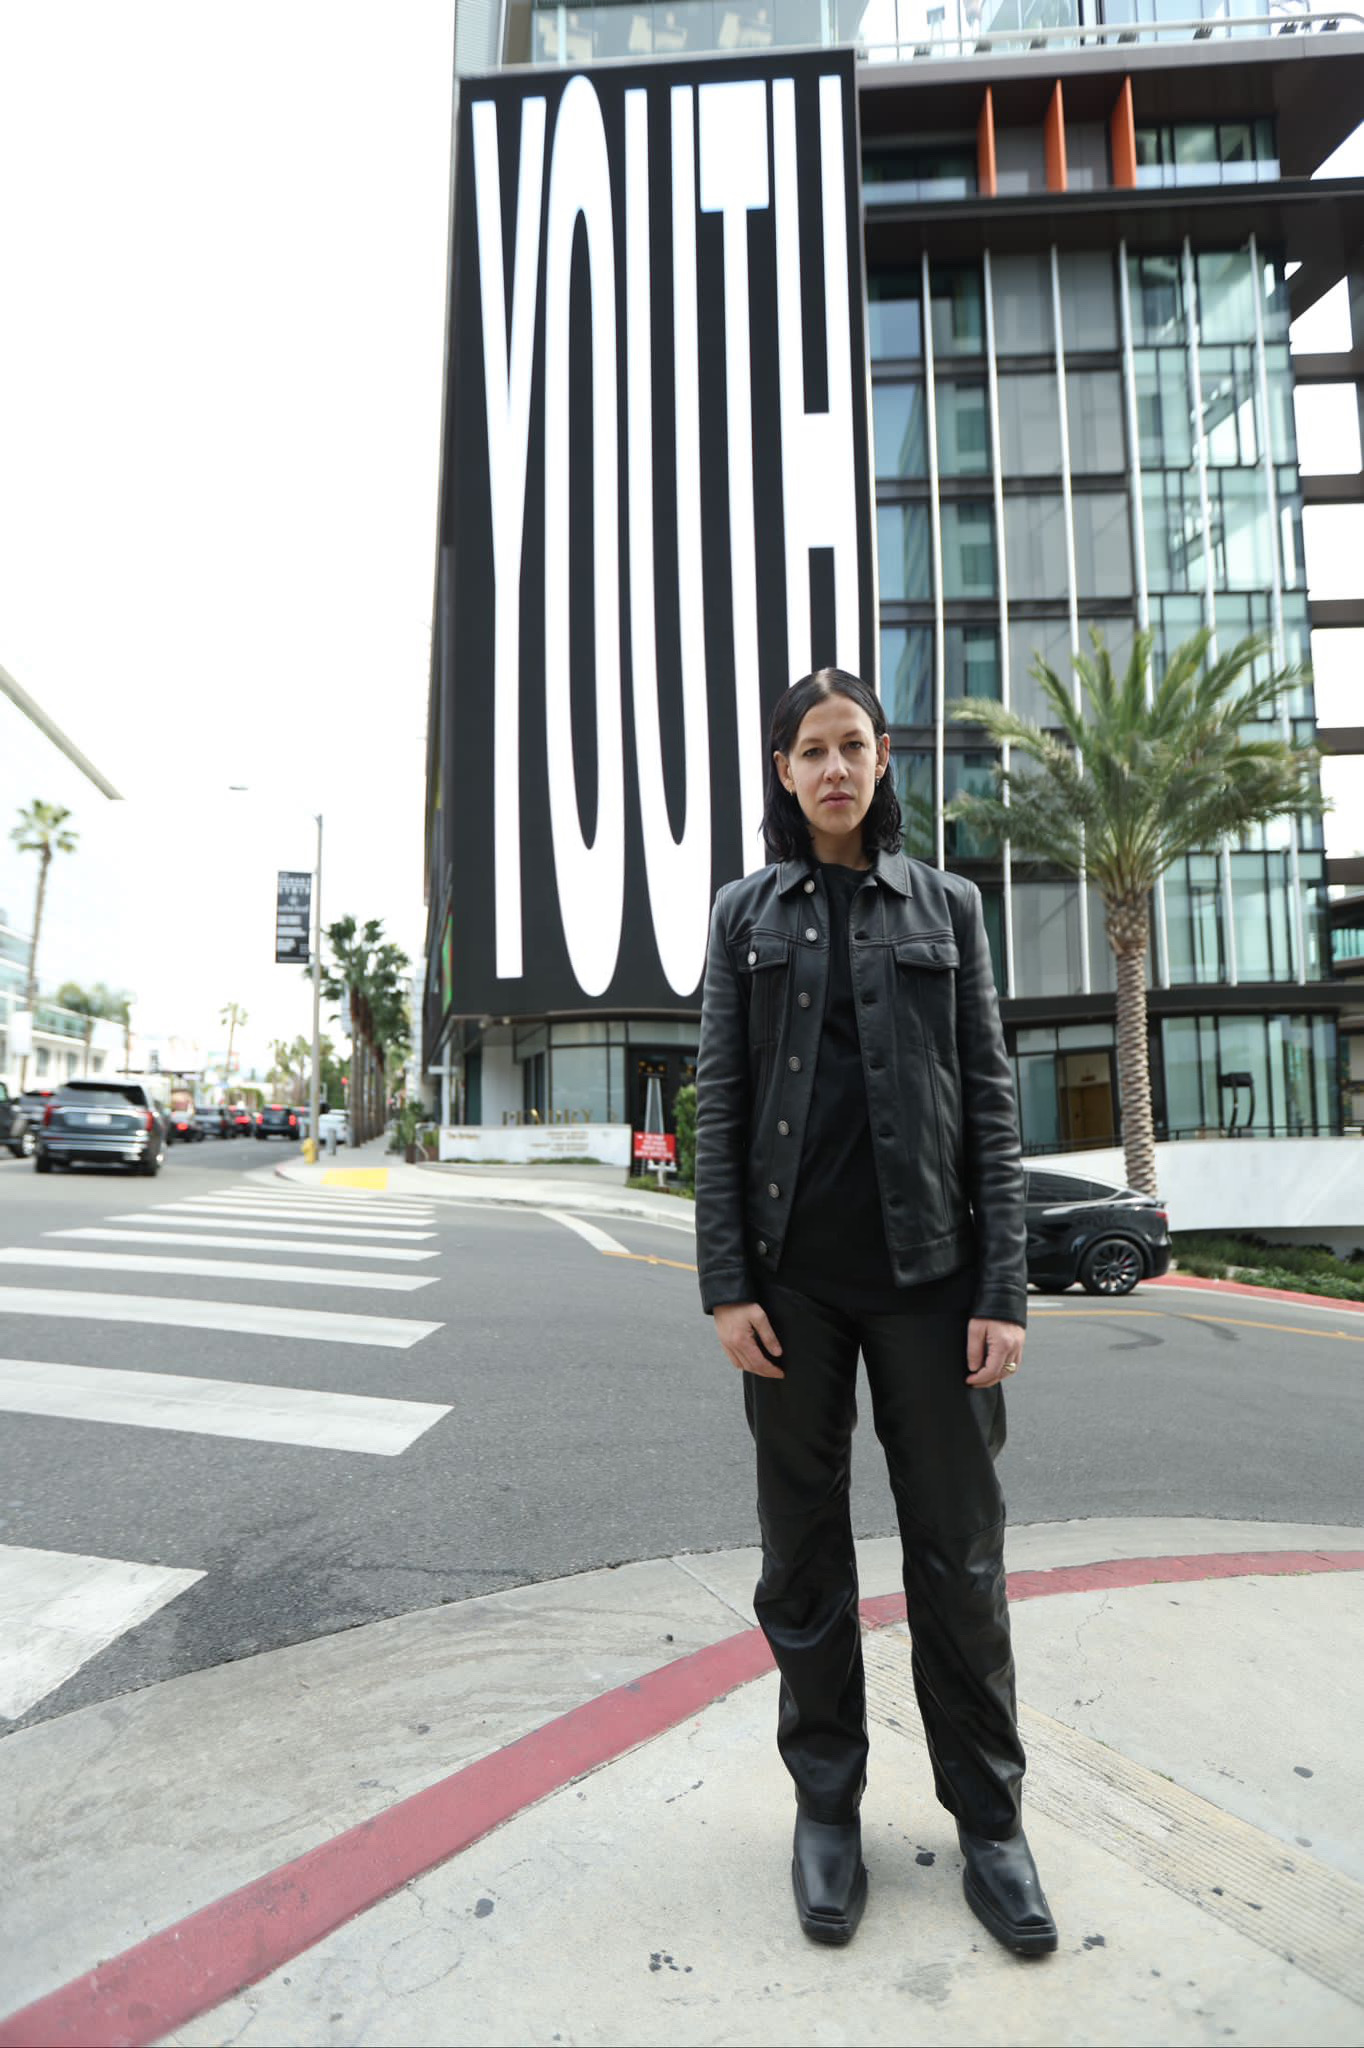 Anne Imhof standing in front of Pendry West Hollywood, Sunset Boulevard, for the launch of #YOUTH24 during Frieze LA 